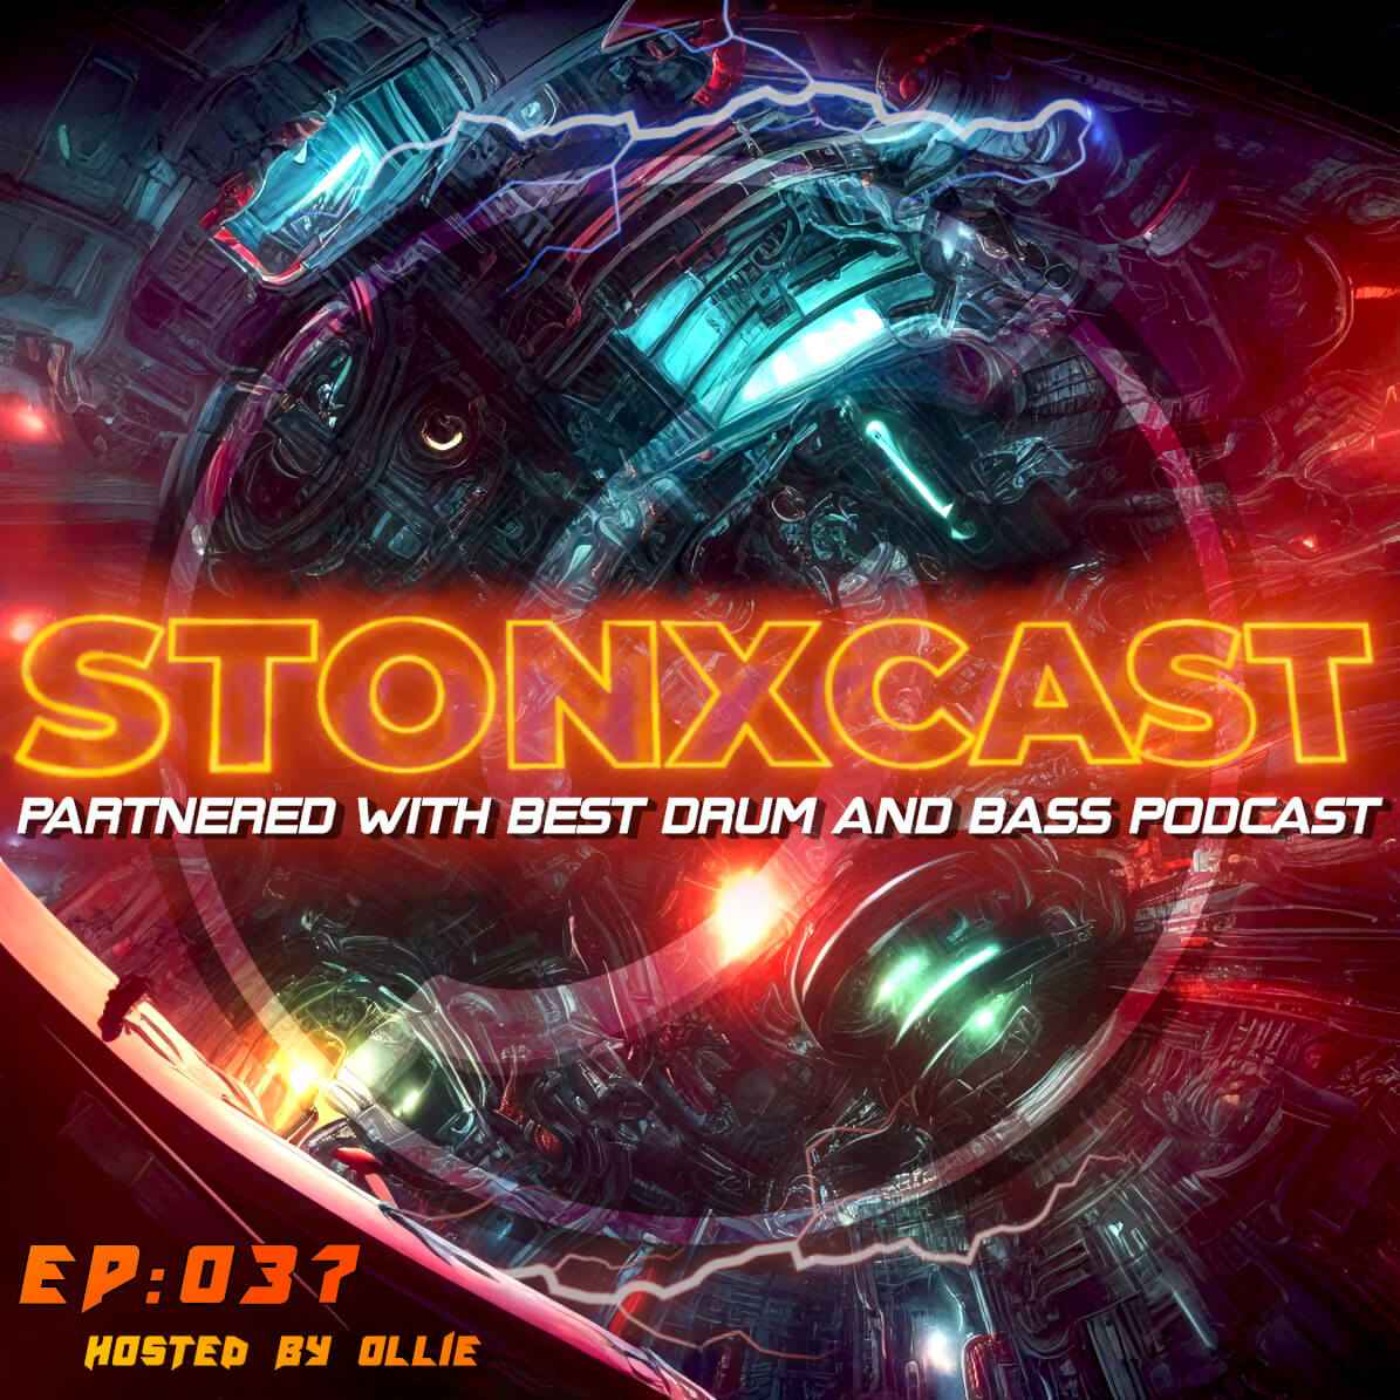 Stonxcast EP:037 - Hosted by Ollie Artwork